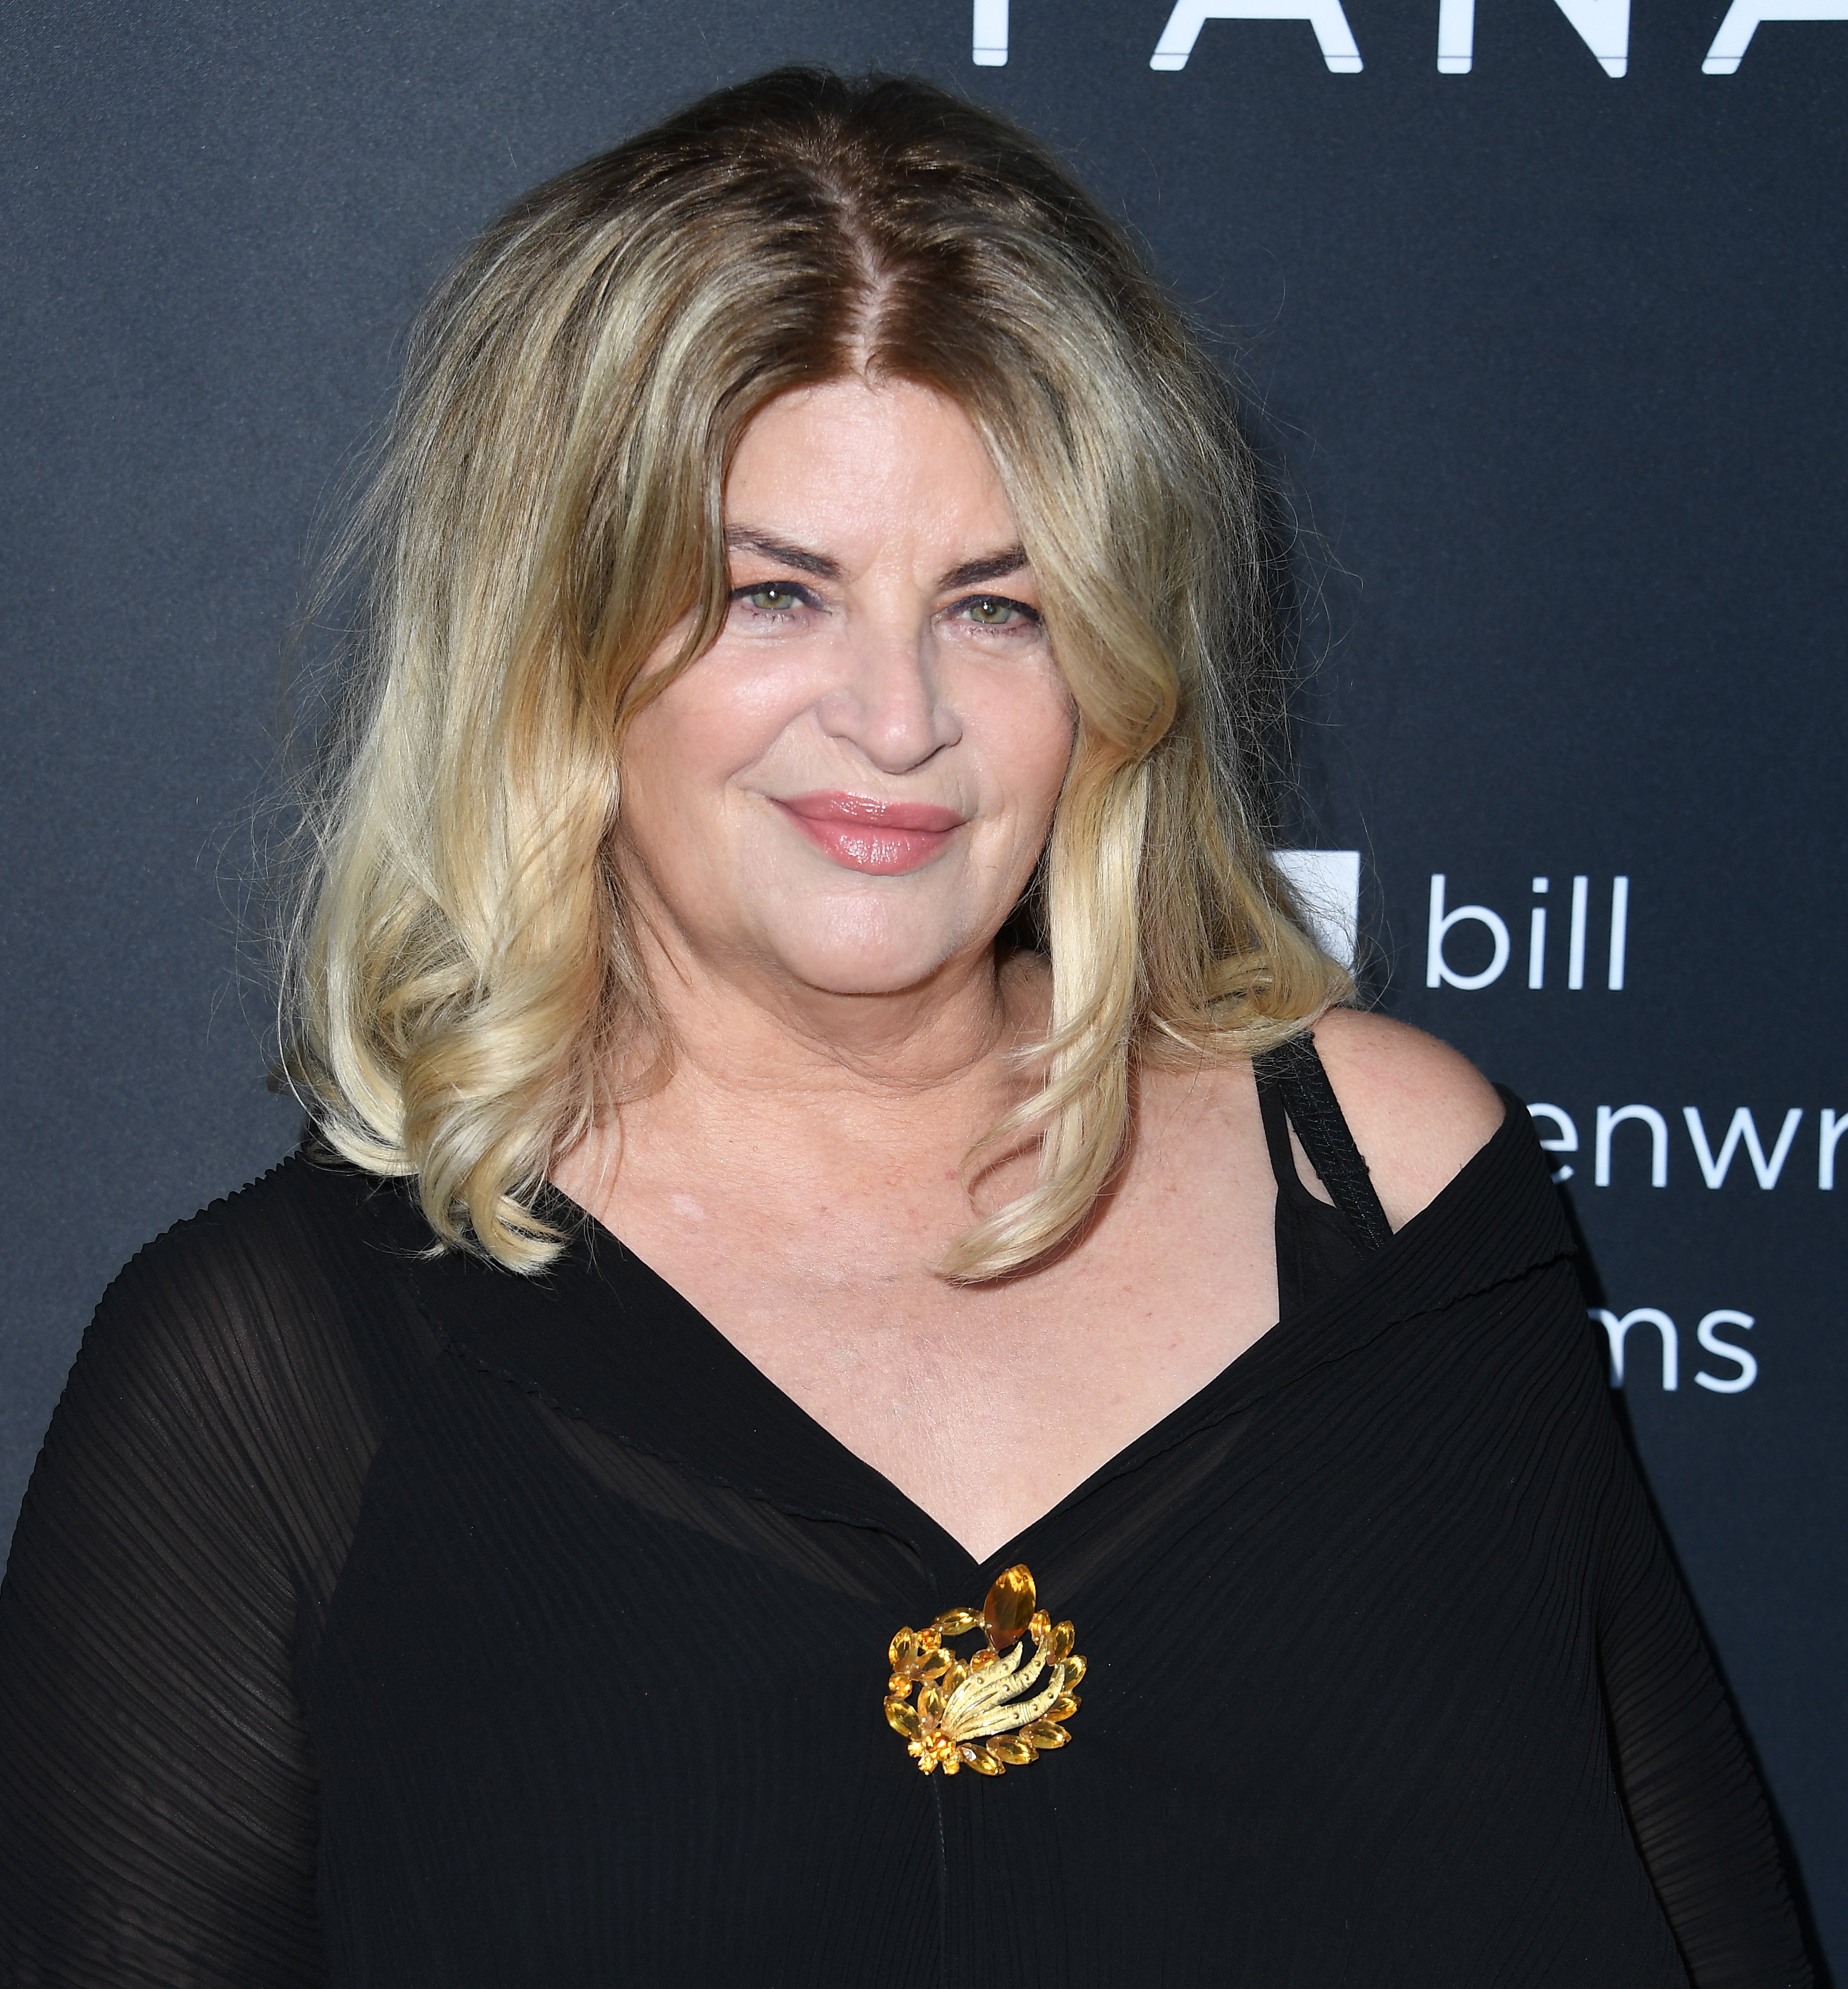  Kirstie Alley arrives at the Premiere Of Quiver Distribution's "The Fanatic" at the Egyptian Theatre on August 22, 2019 in Hollywood, California.| Source: Getty Images